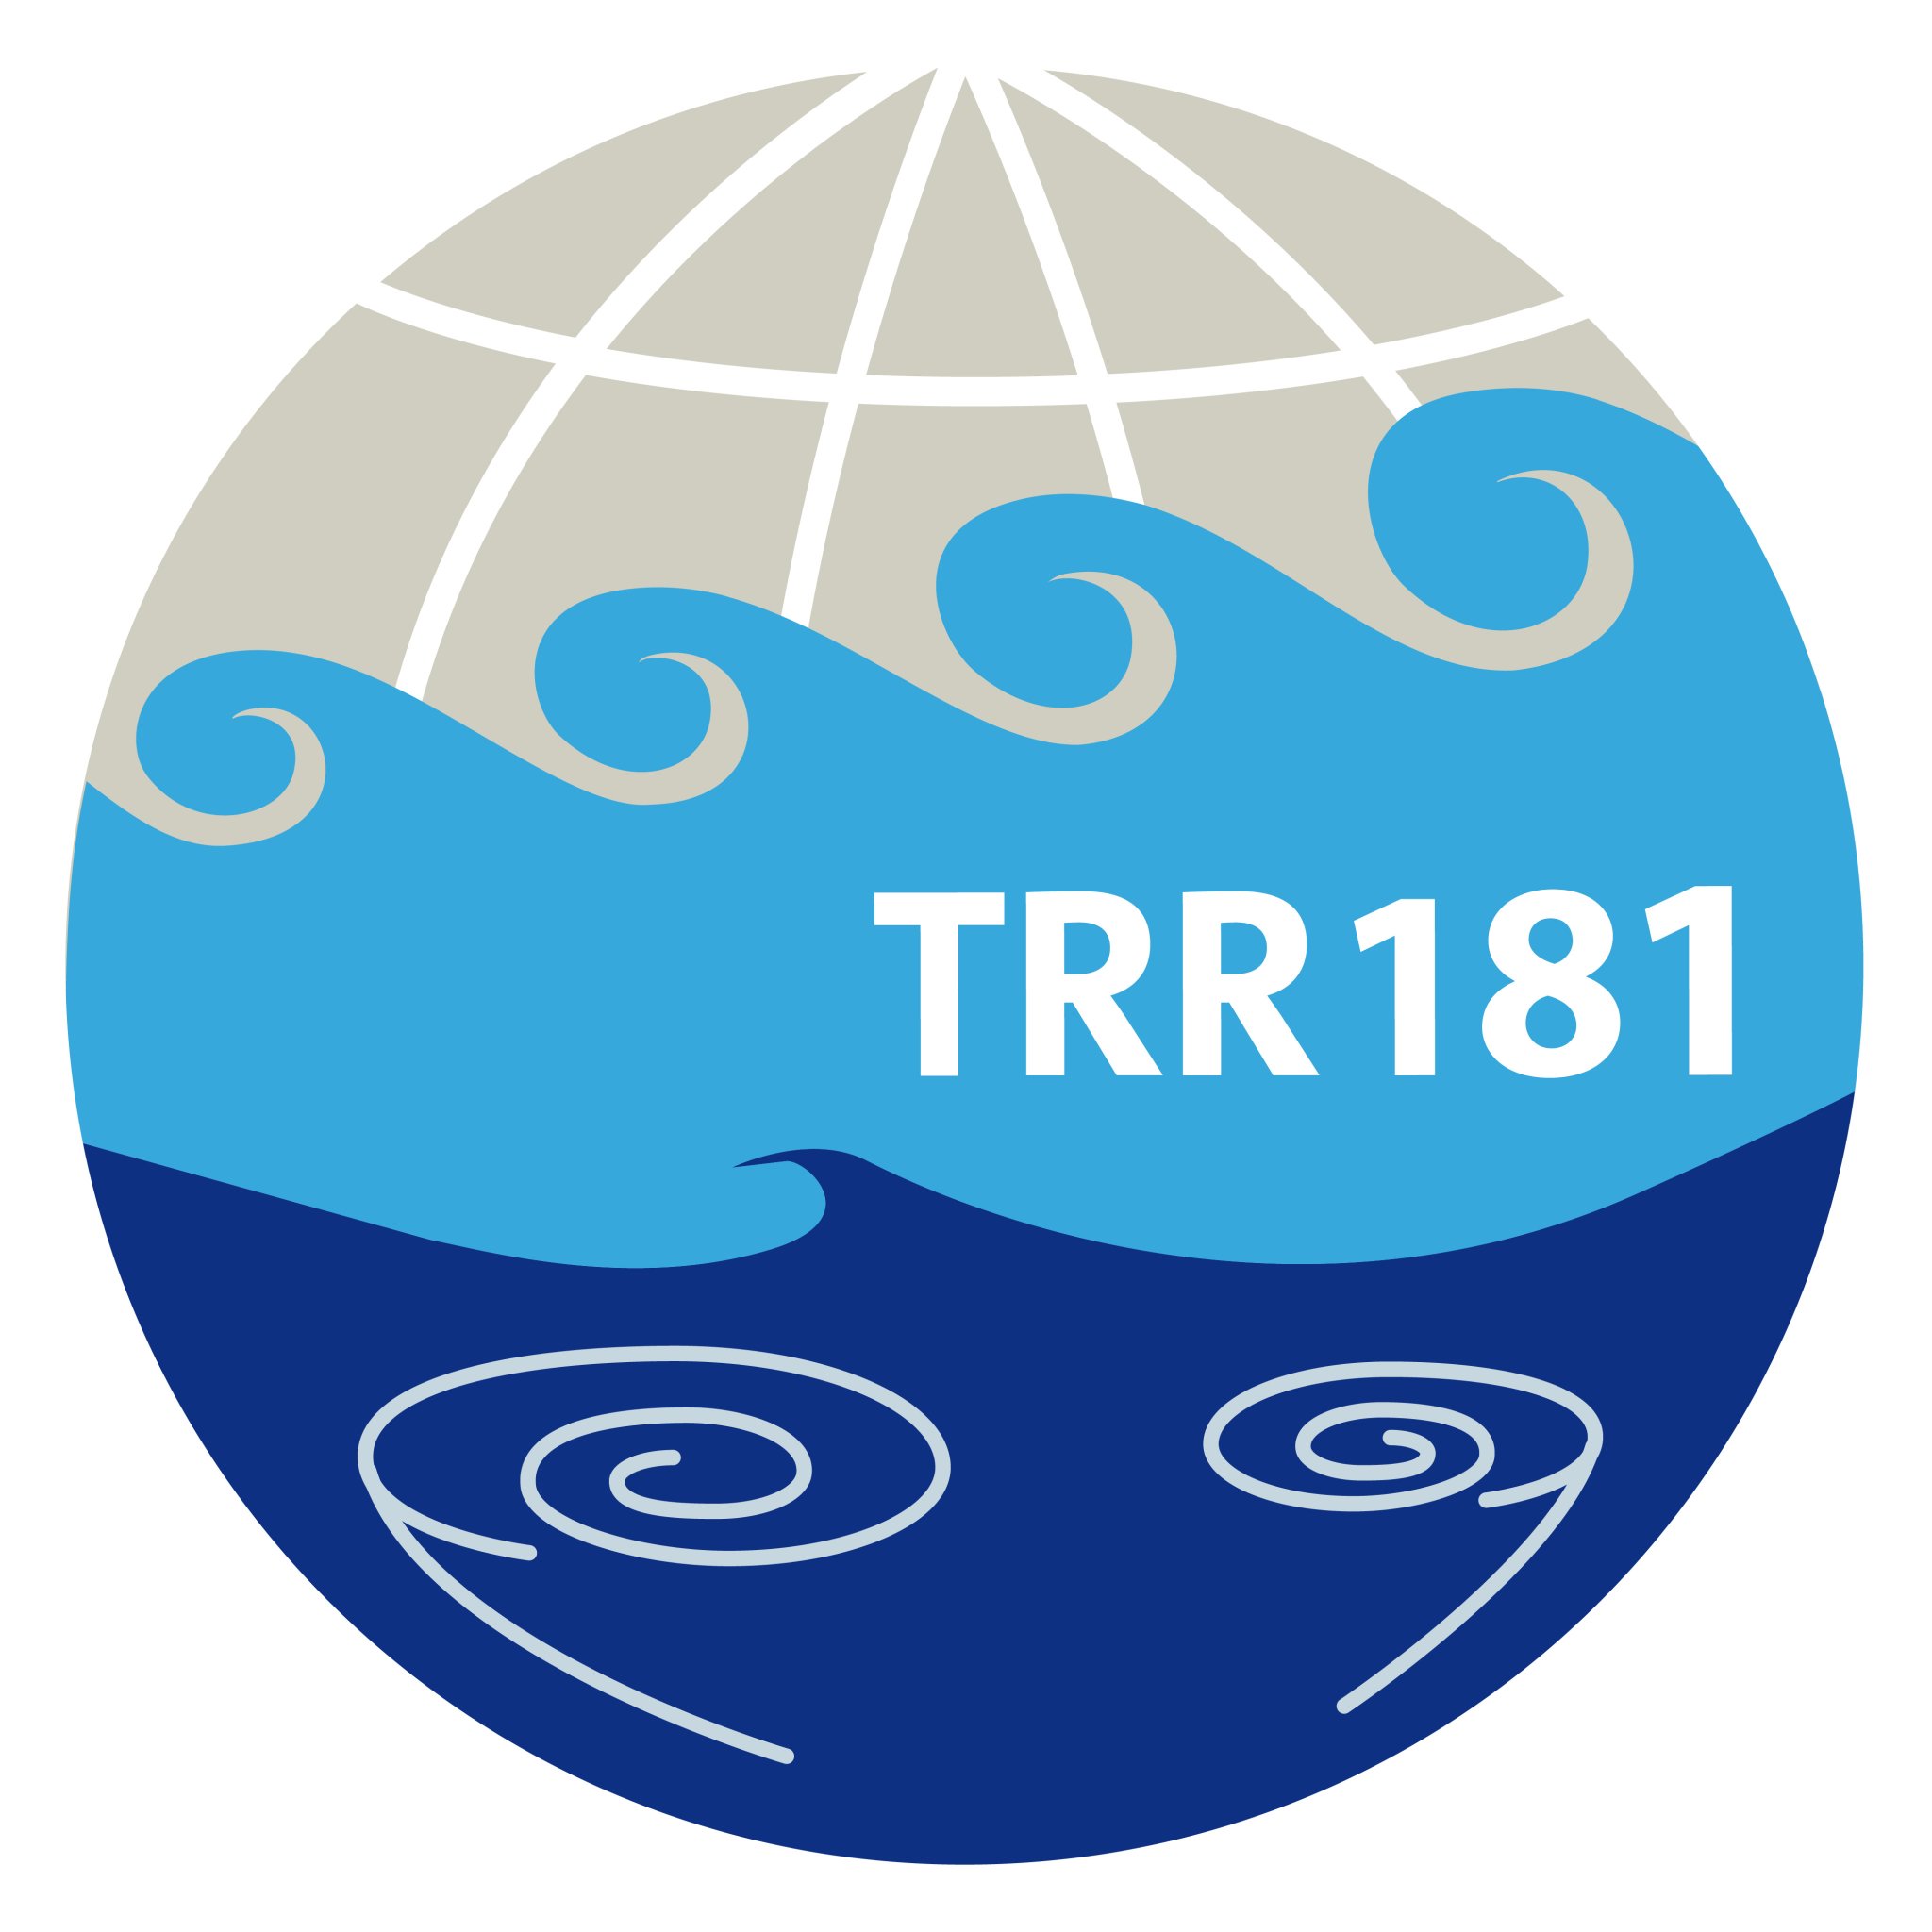 Researching energy transfers in #atmosphere and #ocean with oceanographers, meteorologists and mathematicians // @TRR_181@mastodon.social